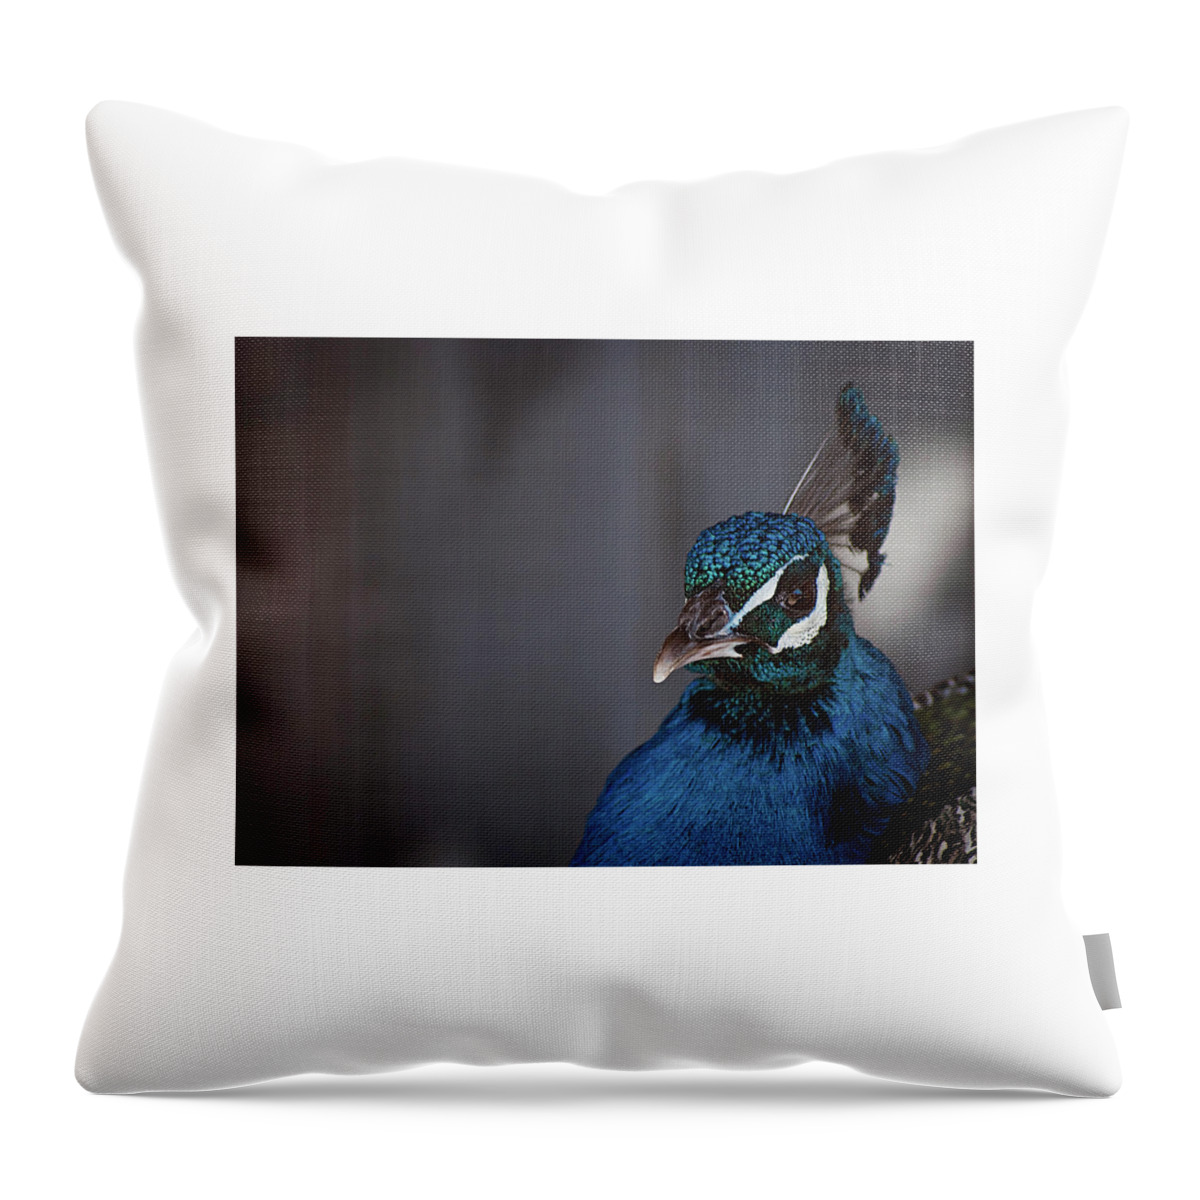 Photography Throw Pillow featuring the photograph Royal Plume by Kathleen Messmer